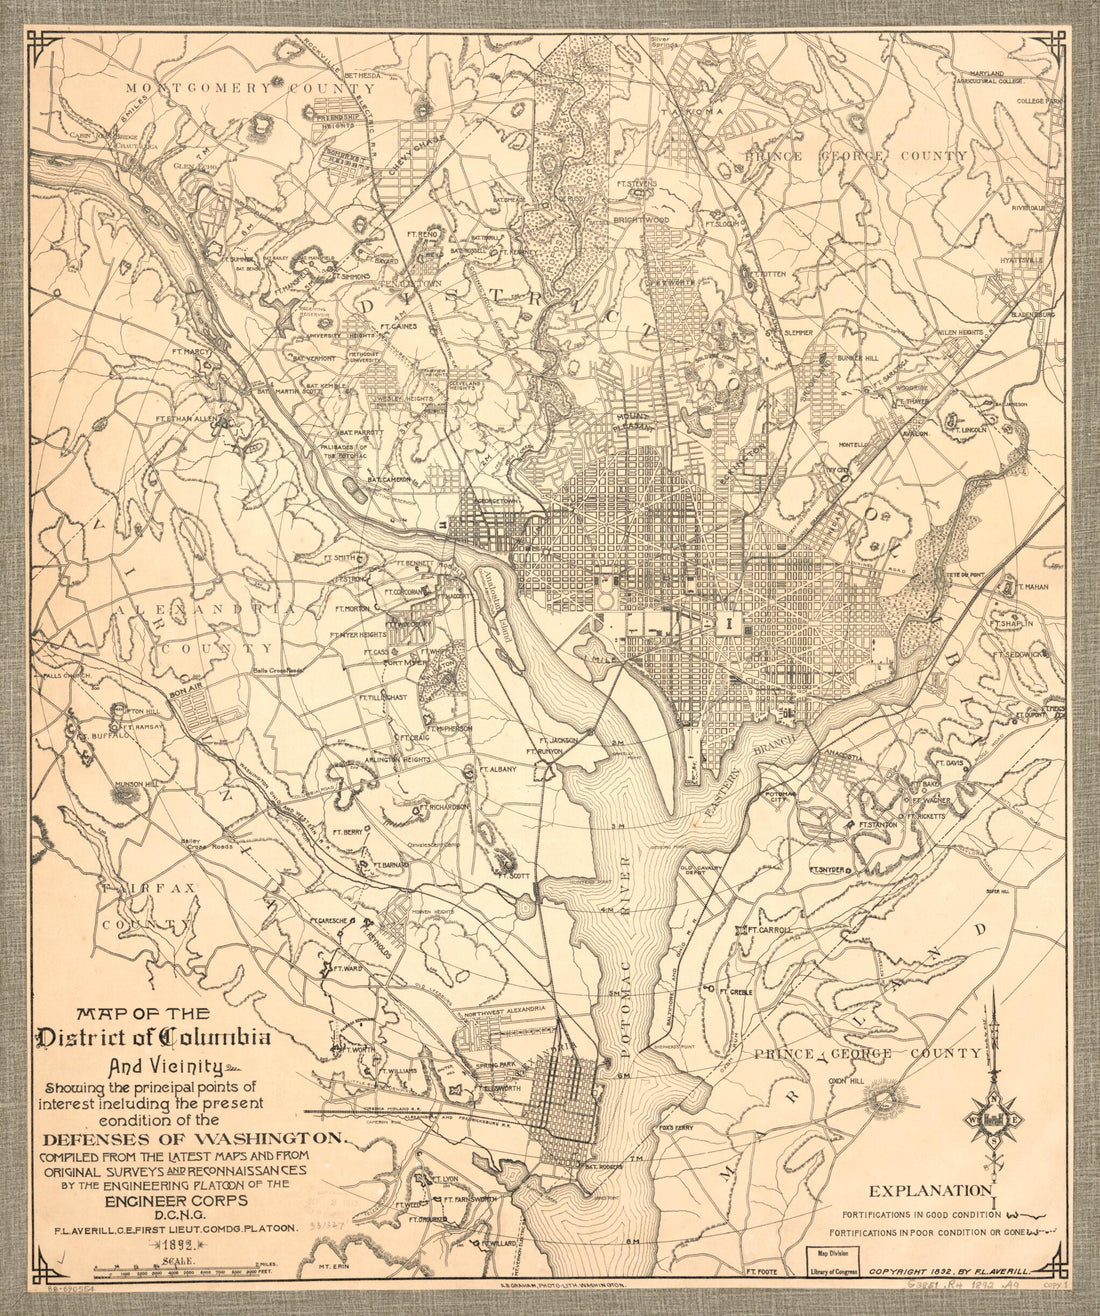 This old map of Map of the District of Columbia and Vicinity Showing the Principal Points of Interest Including the Present Condition of the Defenses of Washington from 1892 was created by F. L. (Frank L.) Averill,  District of Columbia National Guard. E